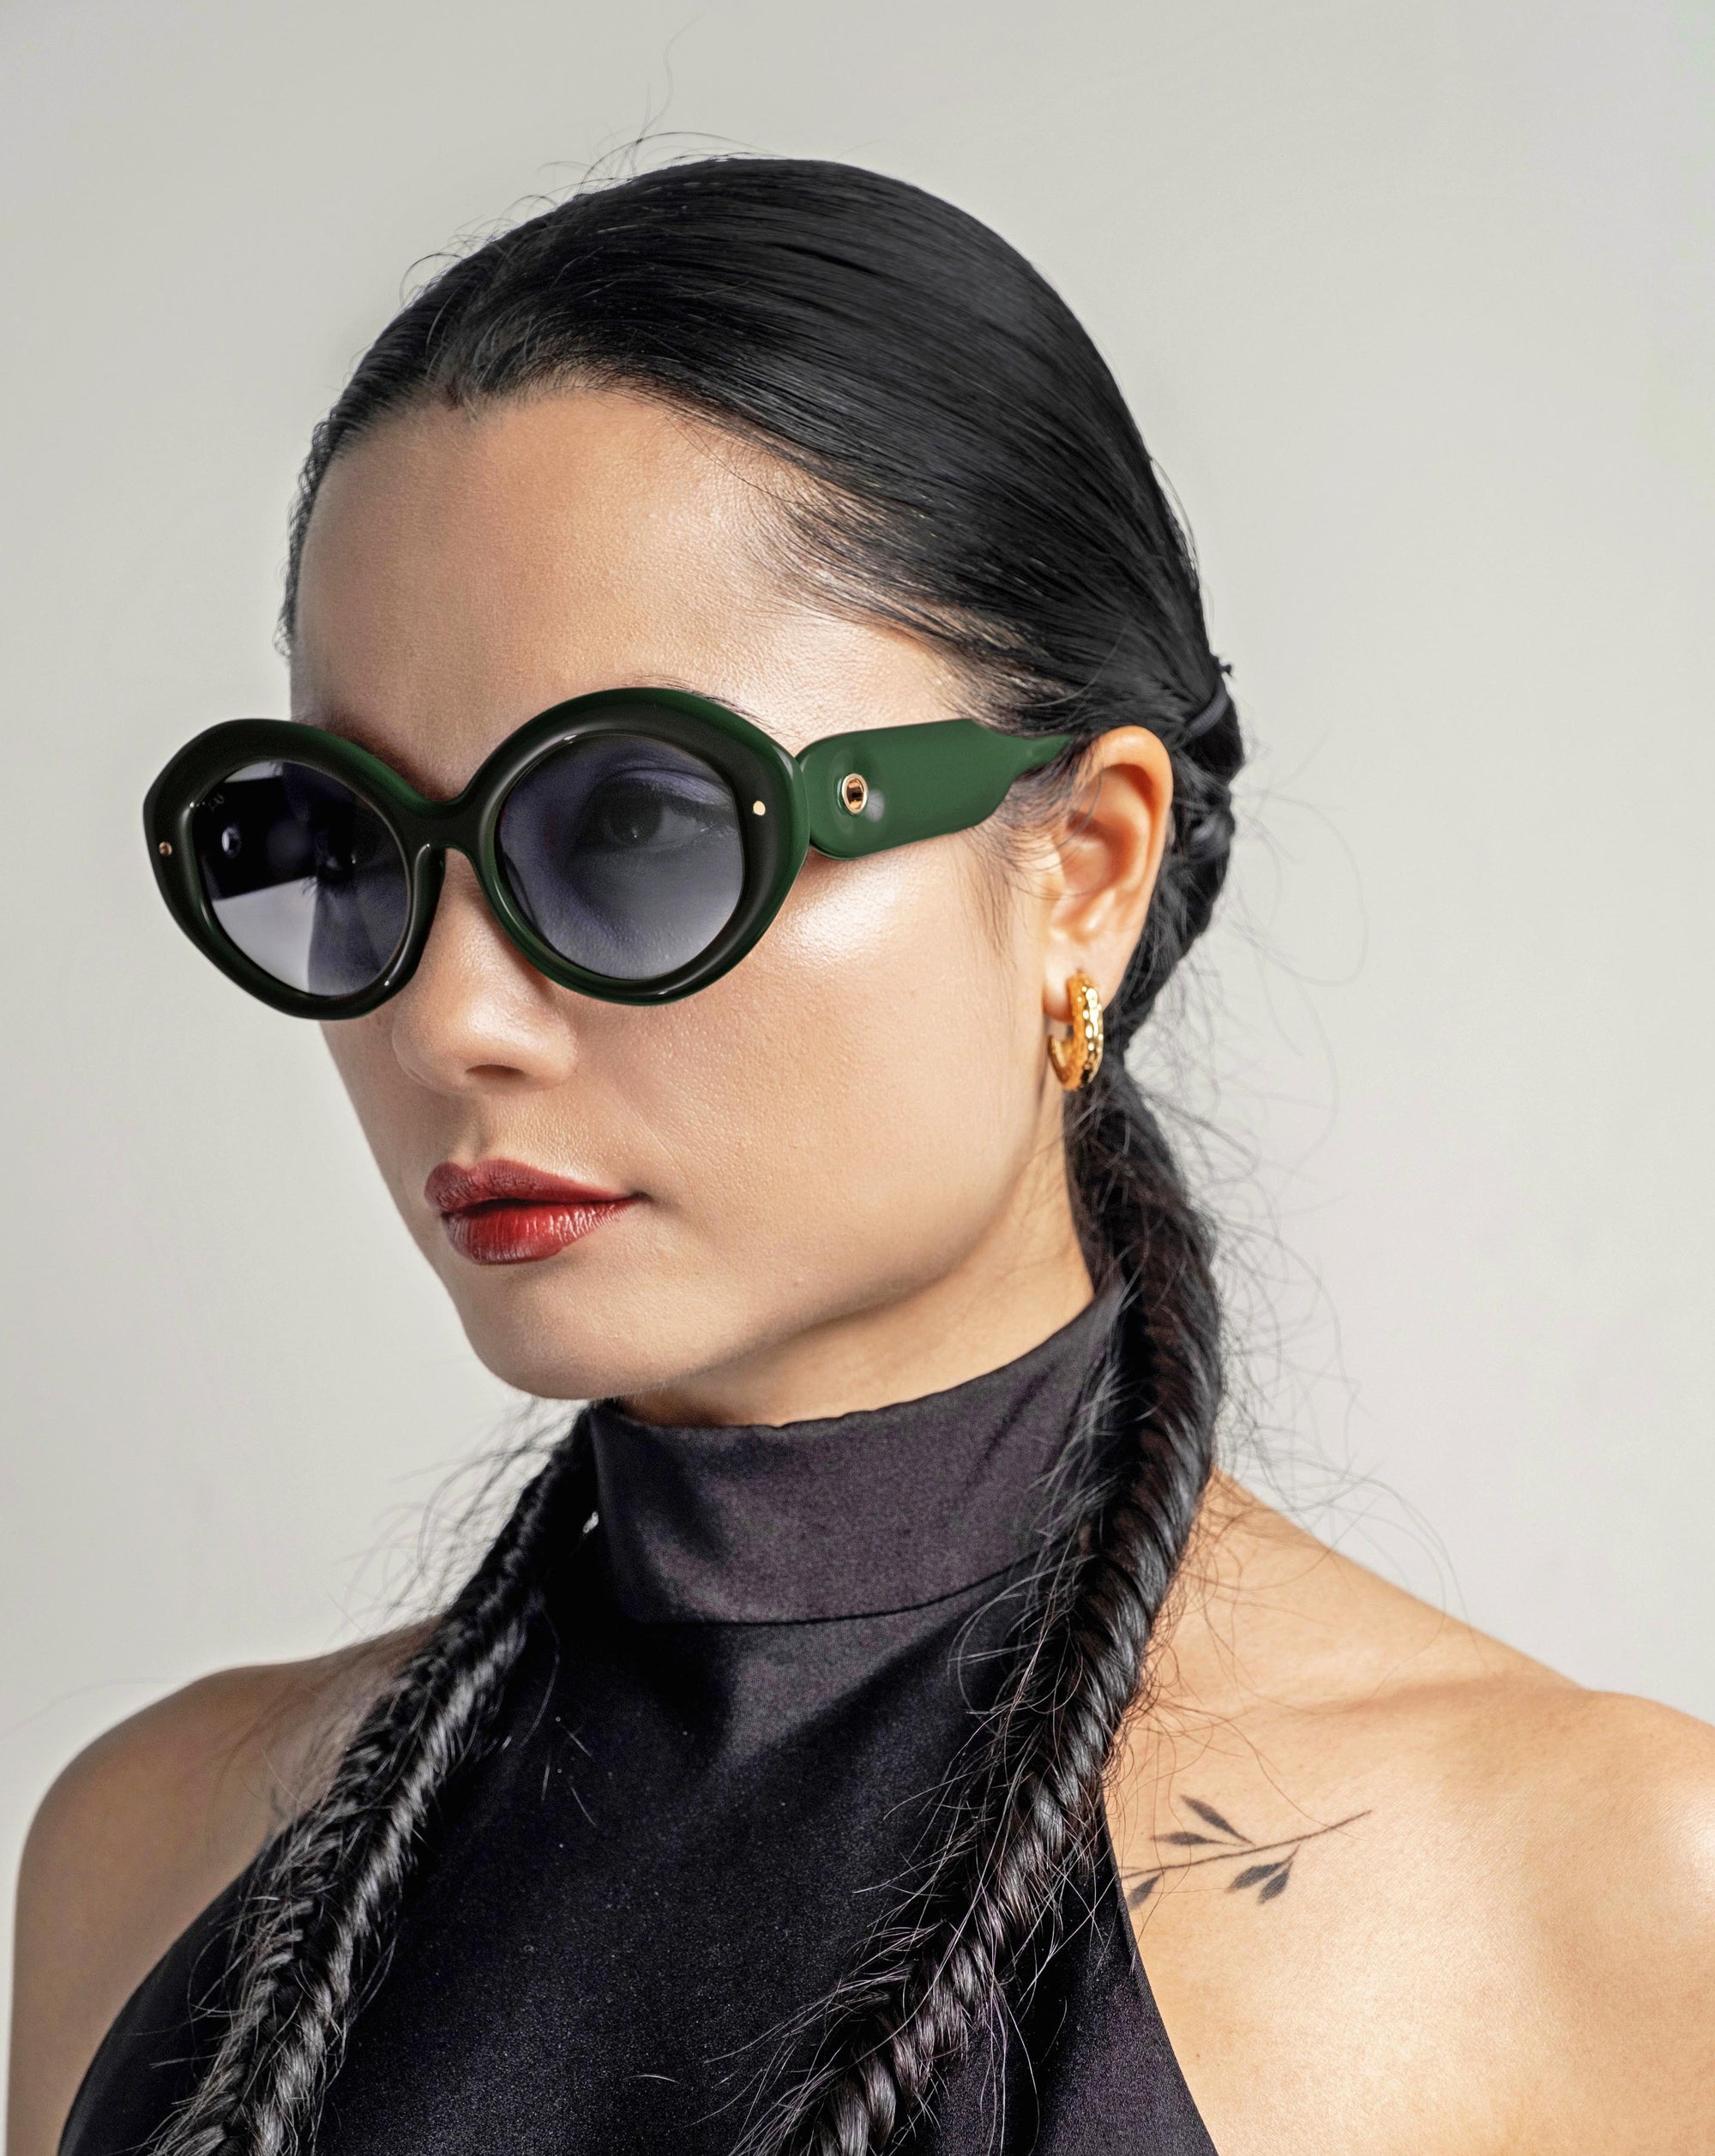 A woman with long, black hair styled in two braids and wearing large, round Helios eyewear by For Art&#39;s Sake®. She has gold hoop earrings with gold plating and a tattoo of an arrow on her shoulder. She is dressed in a sleeveless black top against a plain background.